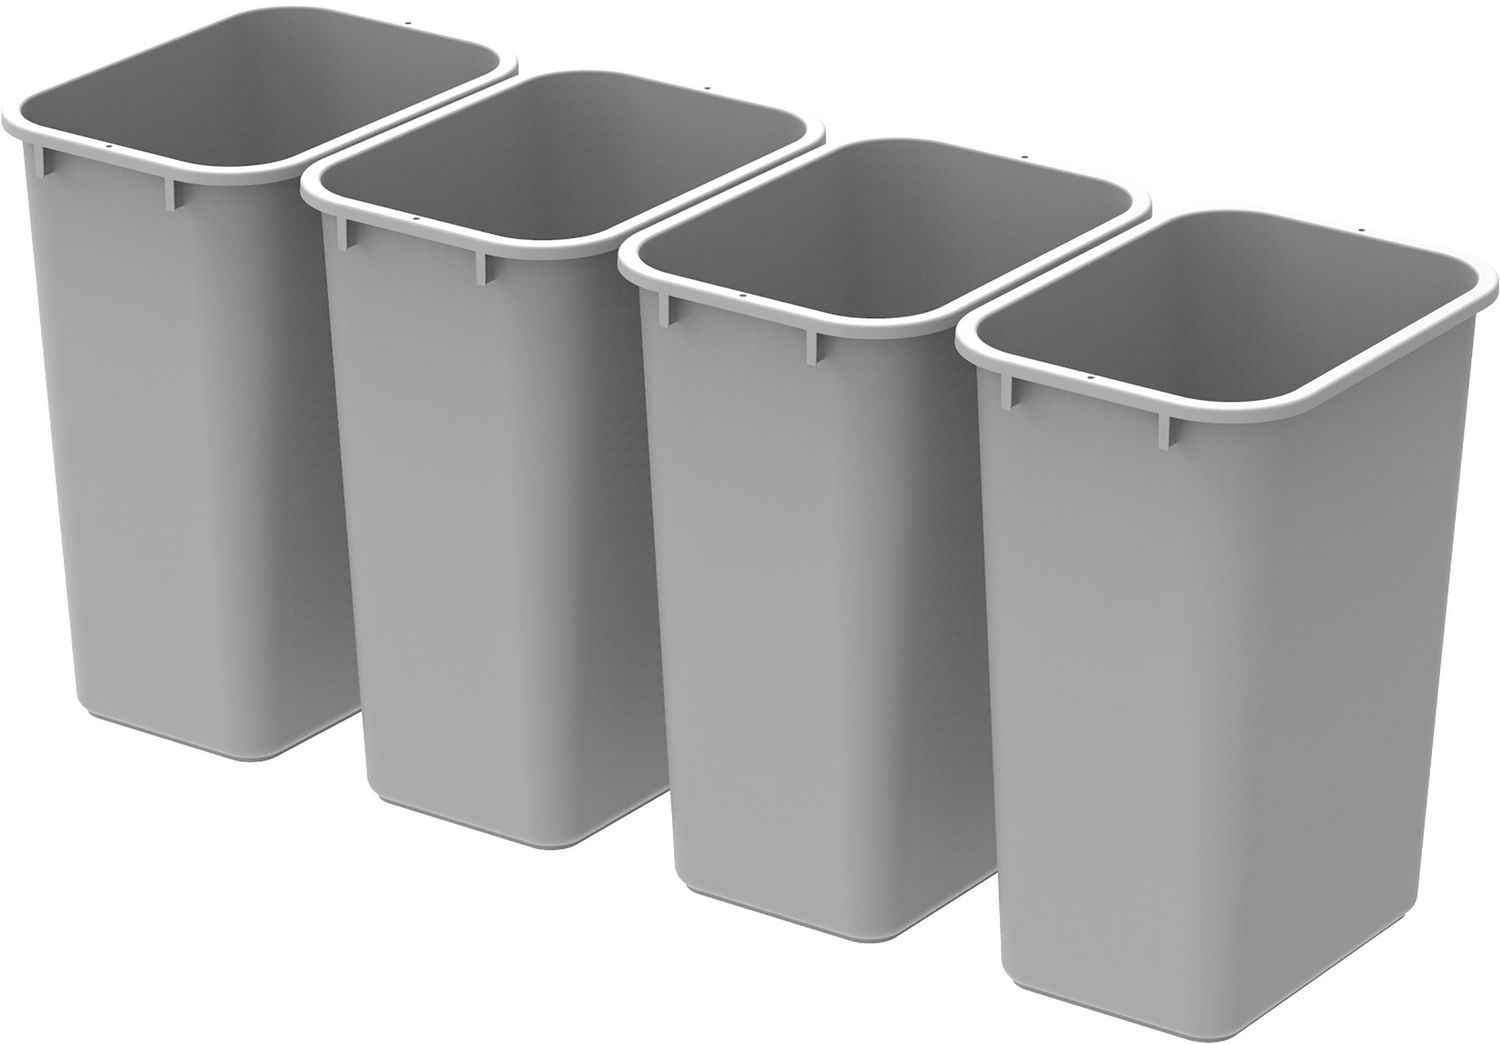 Case of 4 15.5 x 11 x 20.75 Inches Black Large/Tall Waste Basket 